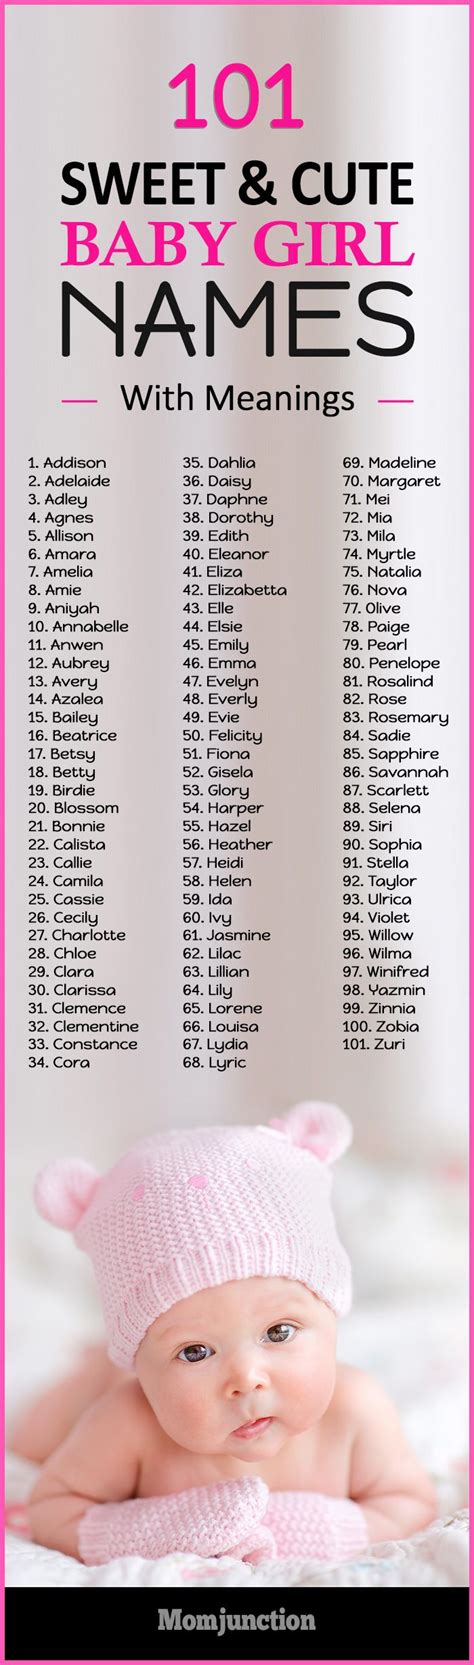 Momjunction Has A List Of 101 Sweet And Cute Baby Girl Names Trendy